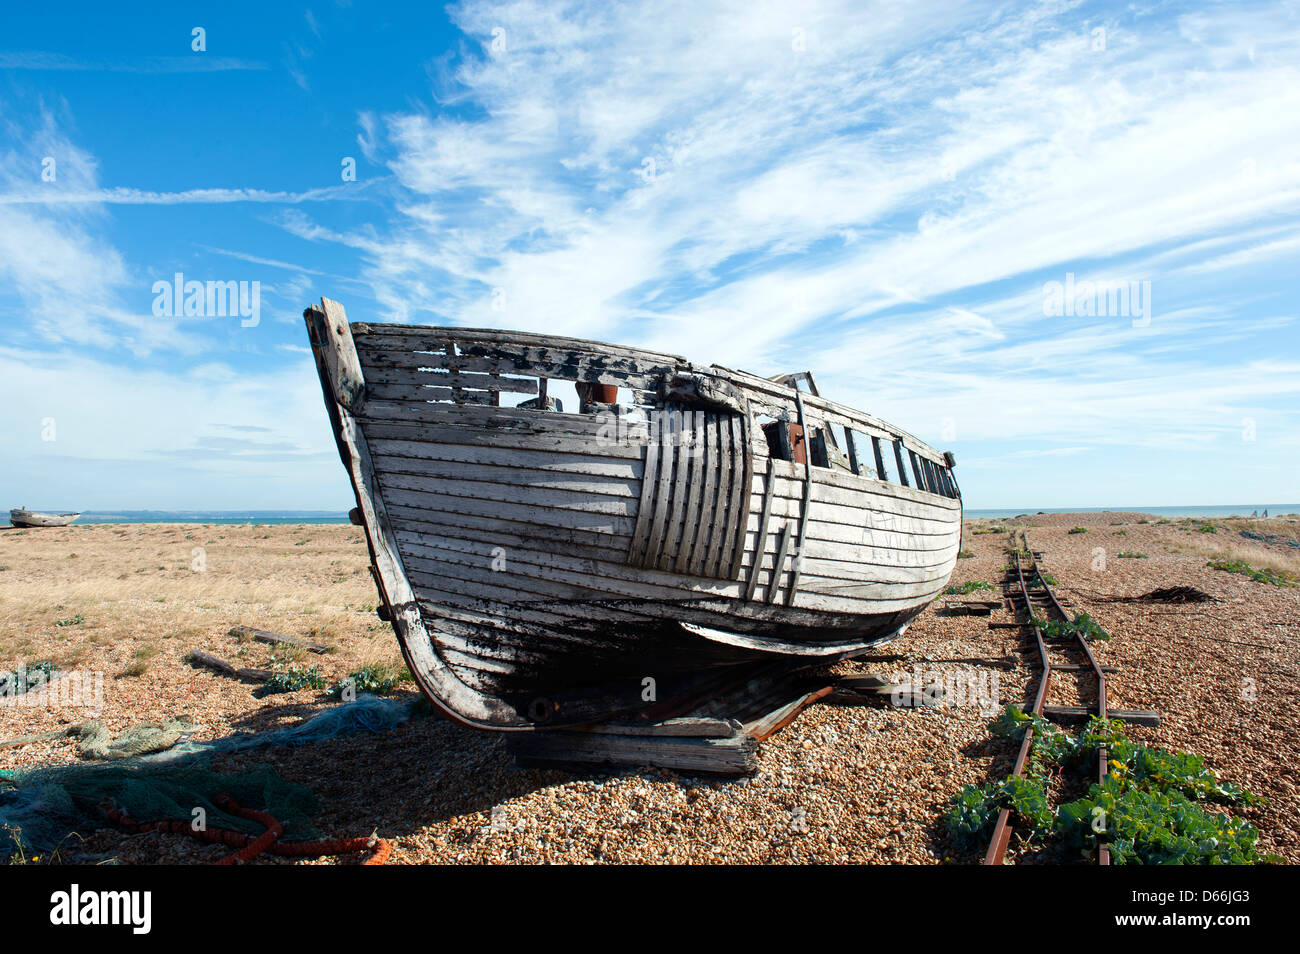 Disused fishing boat on the beach at Dungeness, Kent, UK Stock Photo